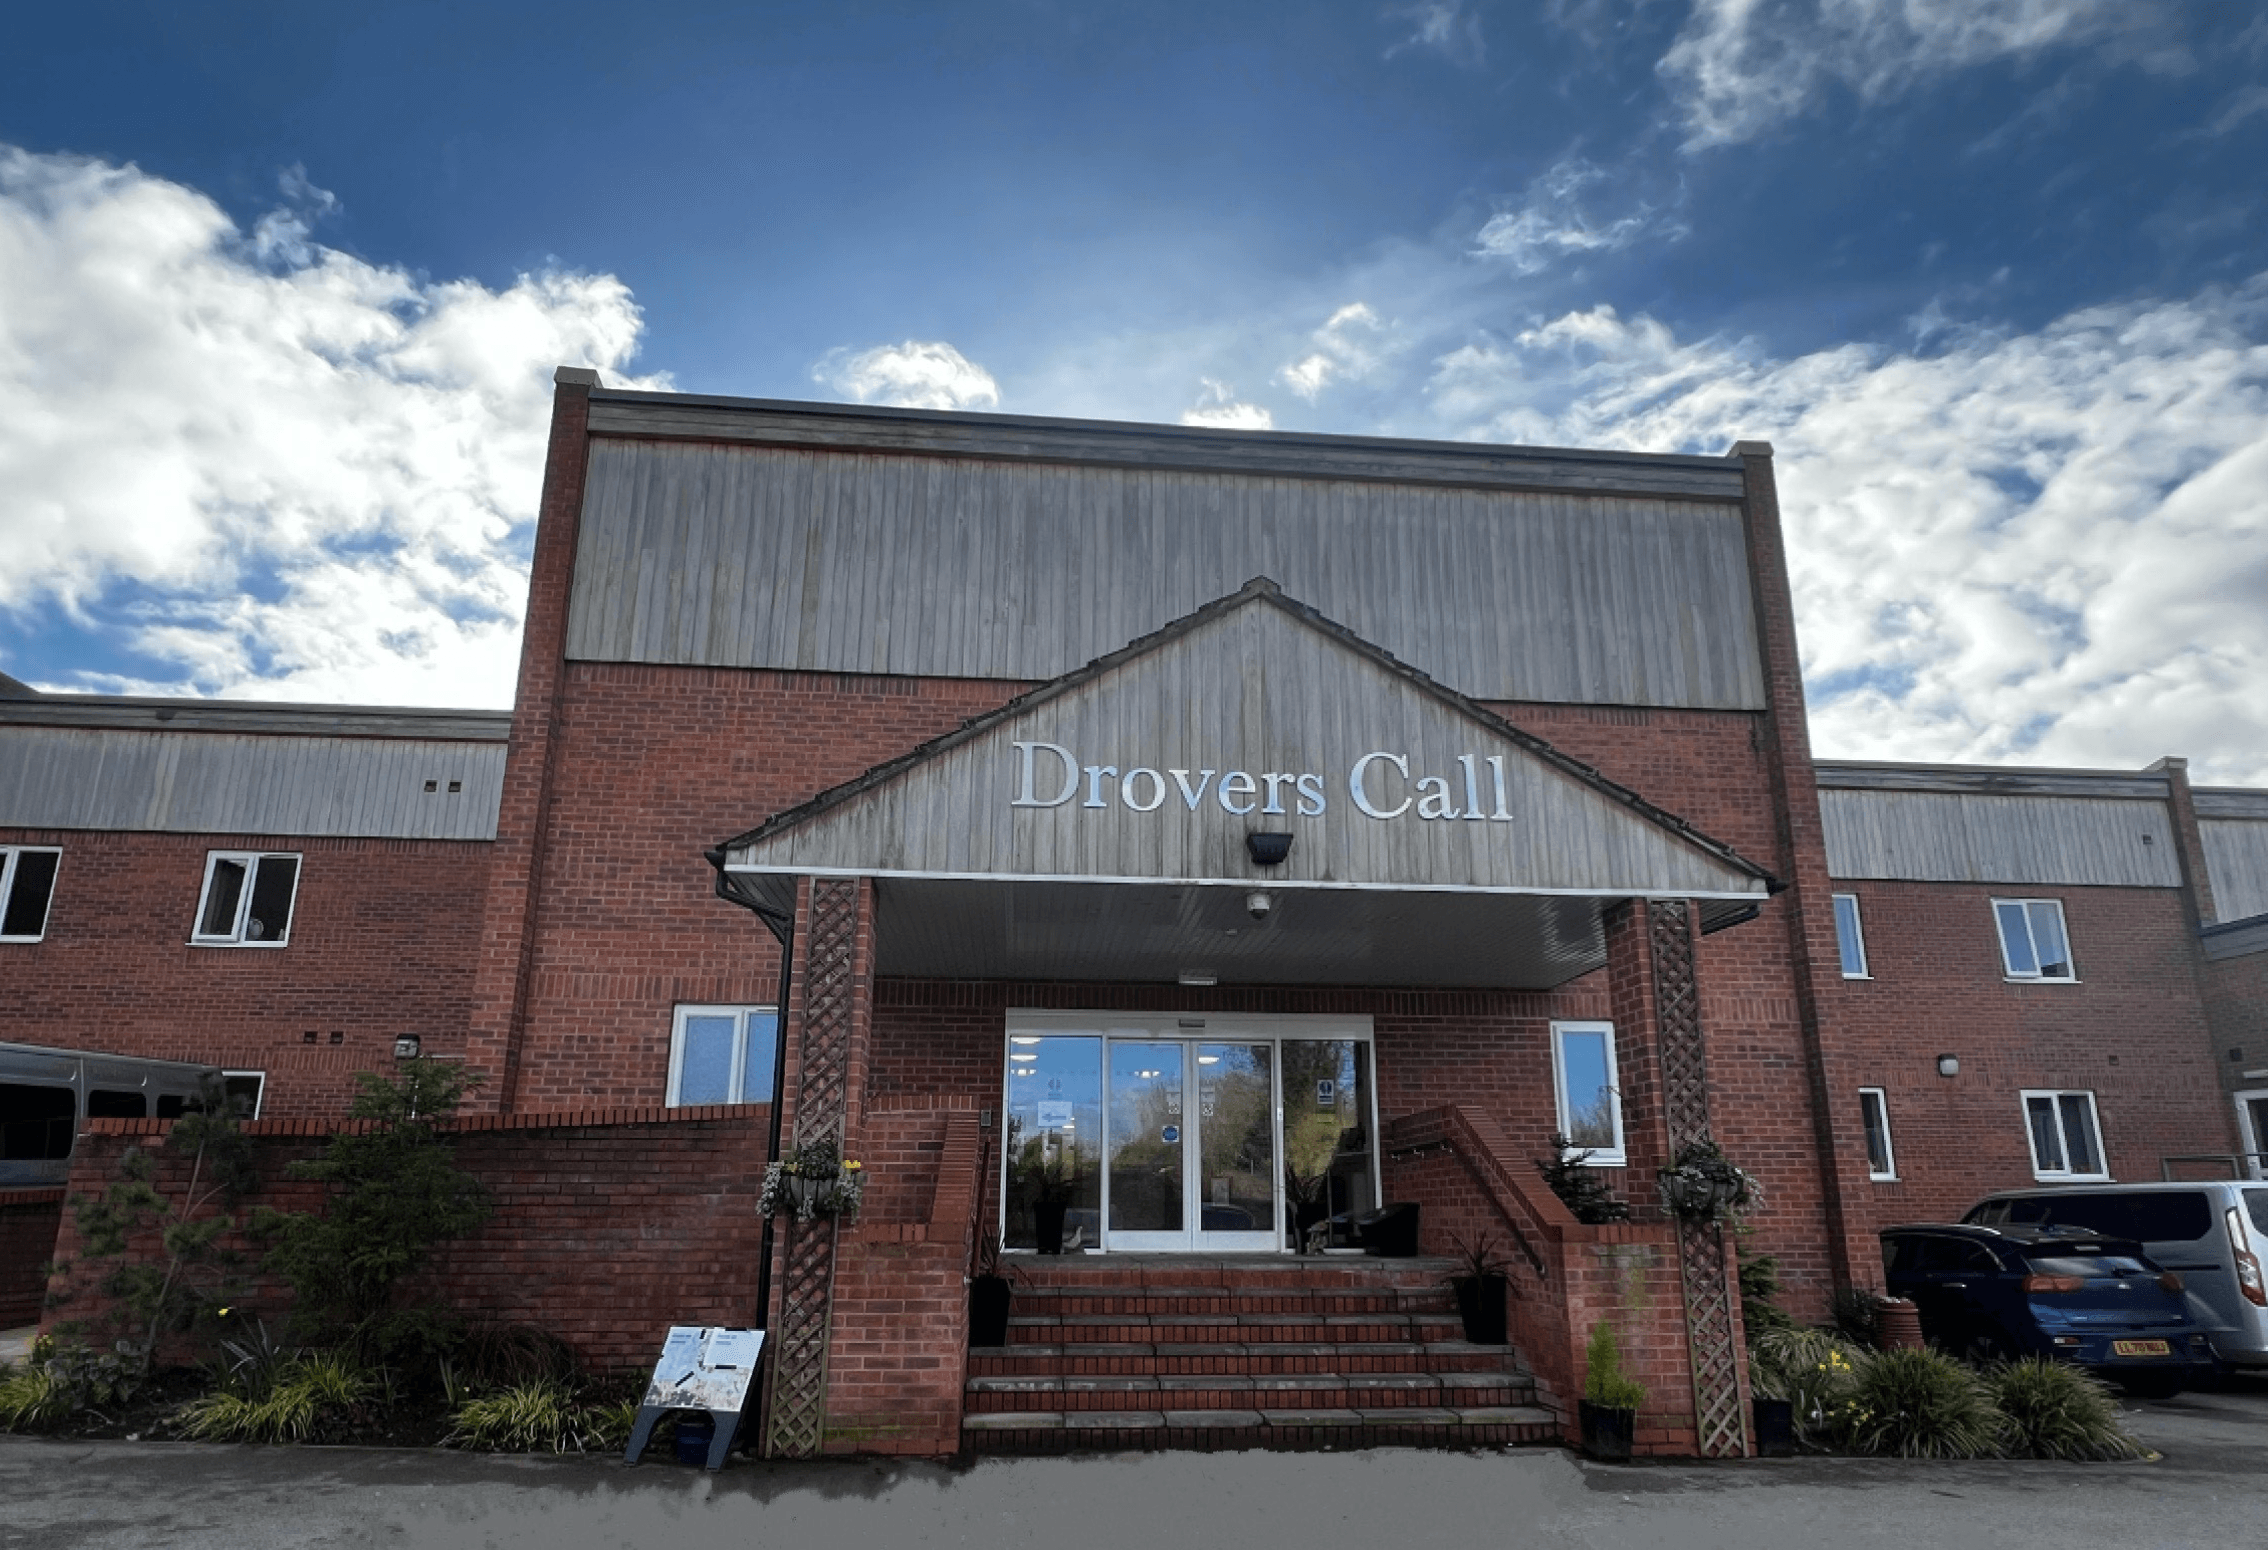 Drovers Call care home in Gainsborough 1